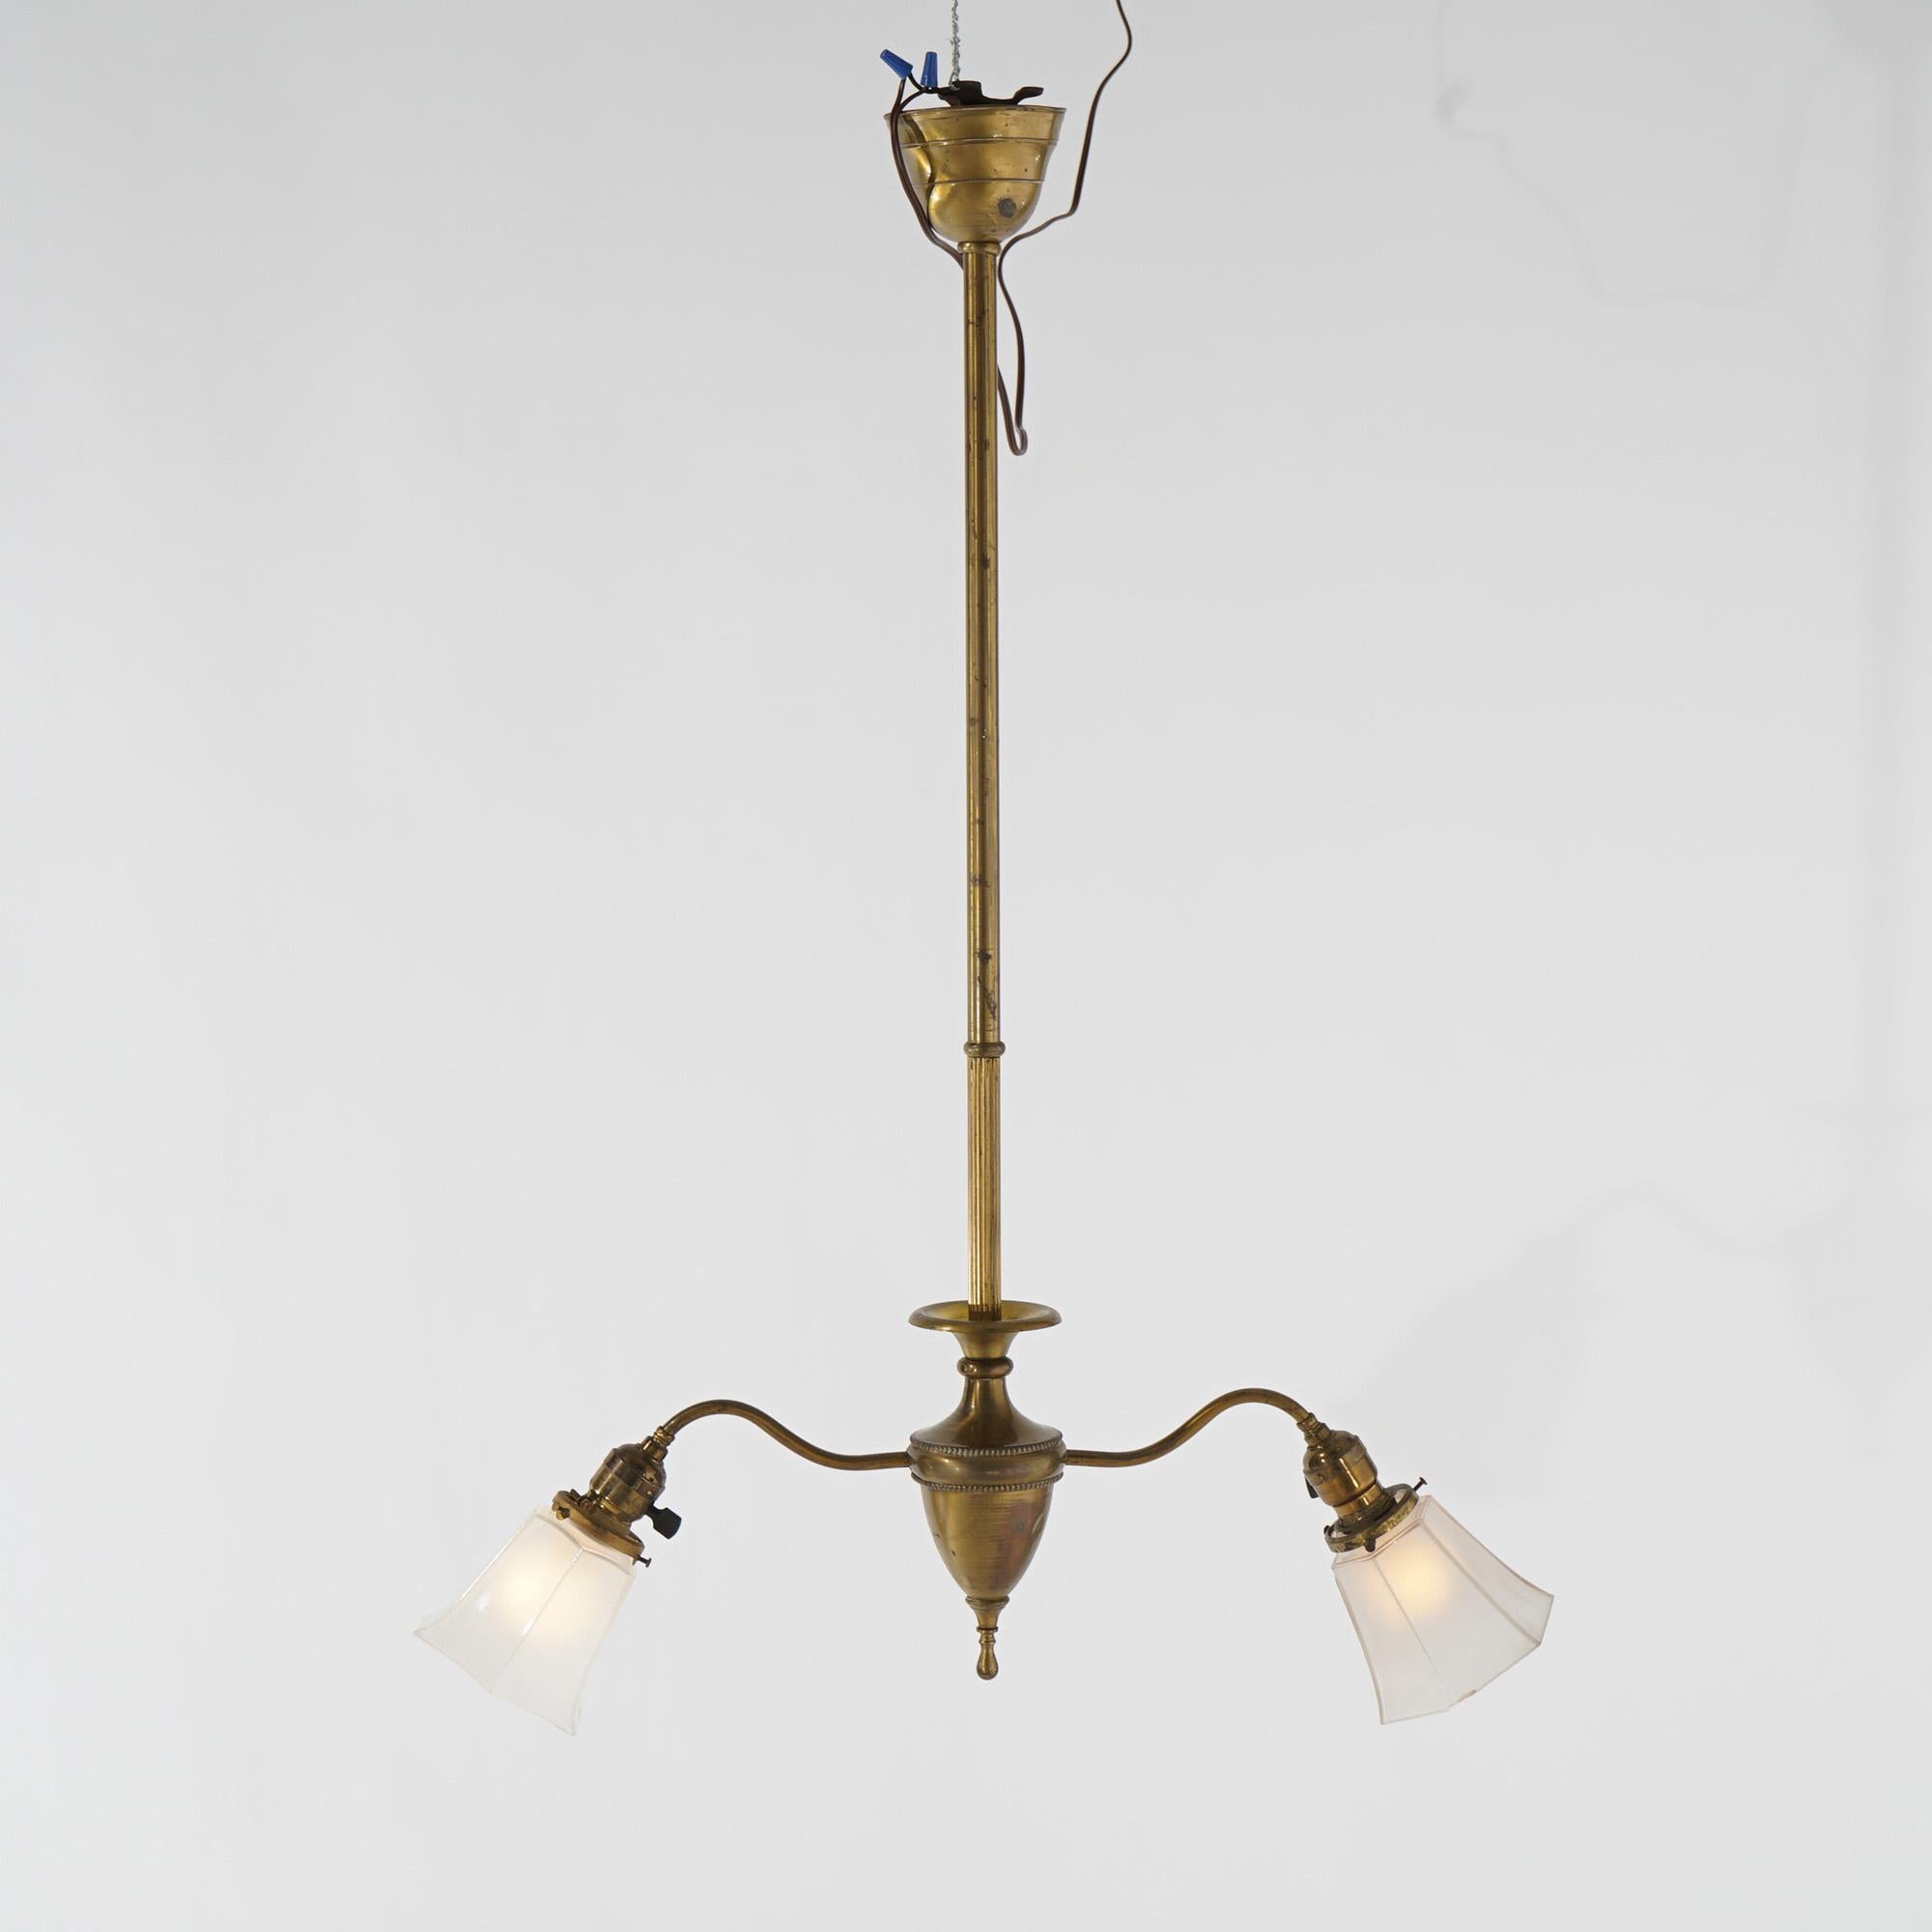 An antique chandelier offers brass and gilt metal construction with urn form font having two scroll arms terminating in lights having glass shades, c1920

Measures - 36